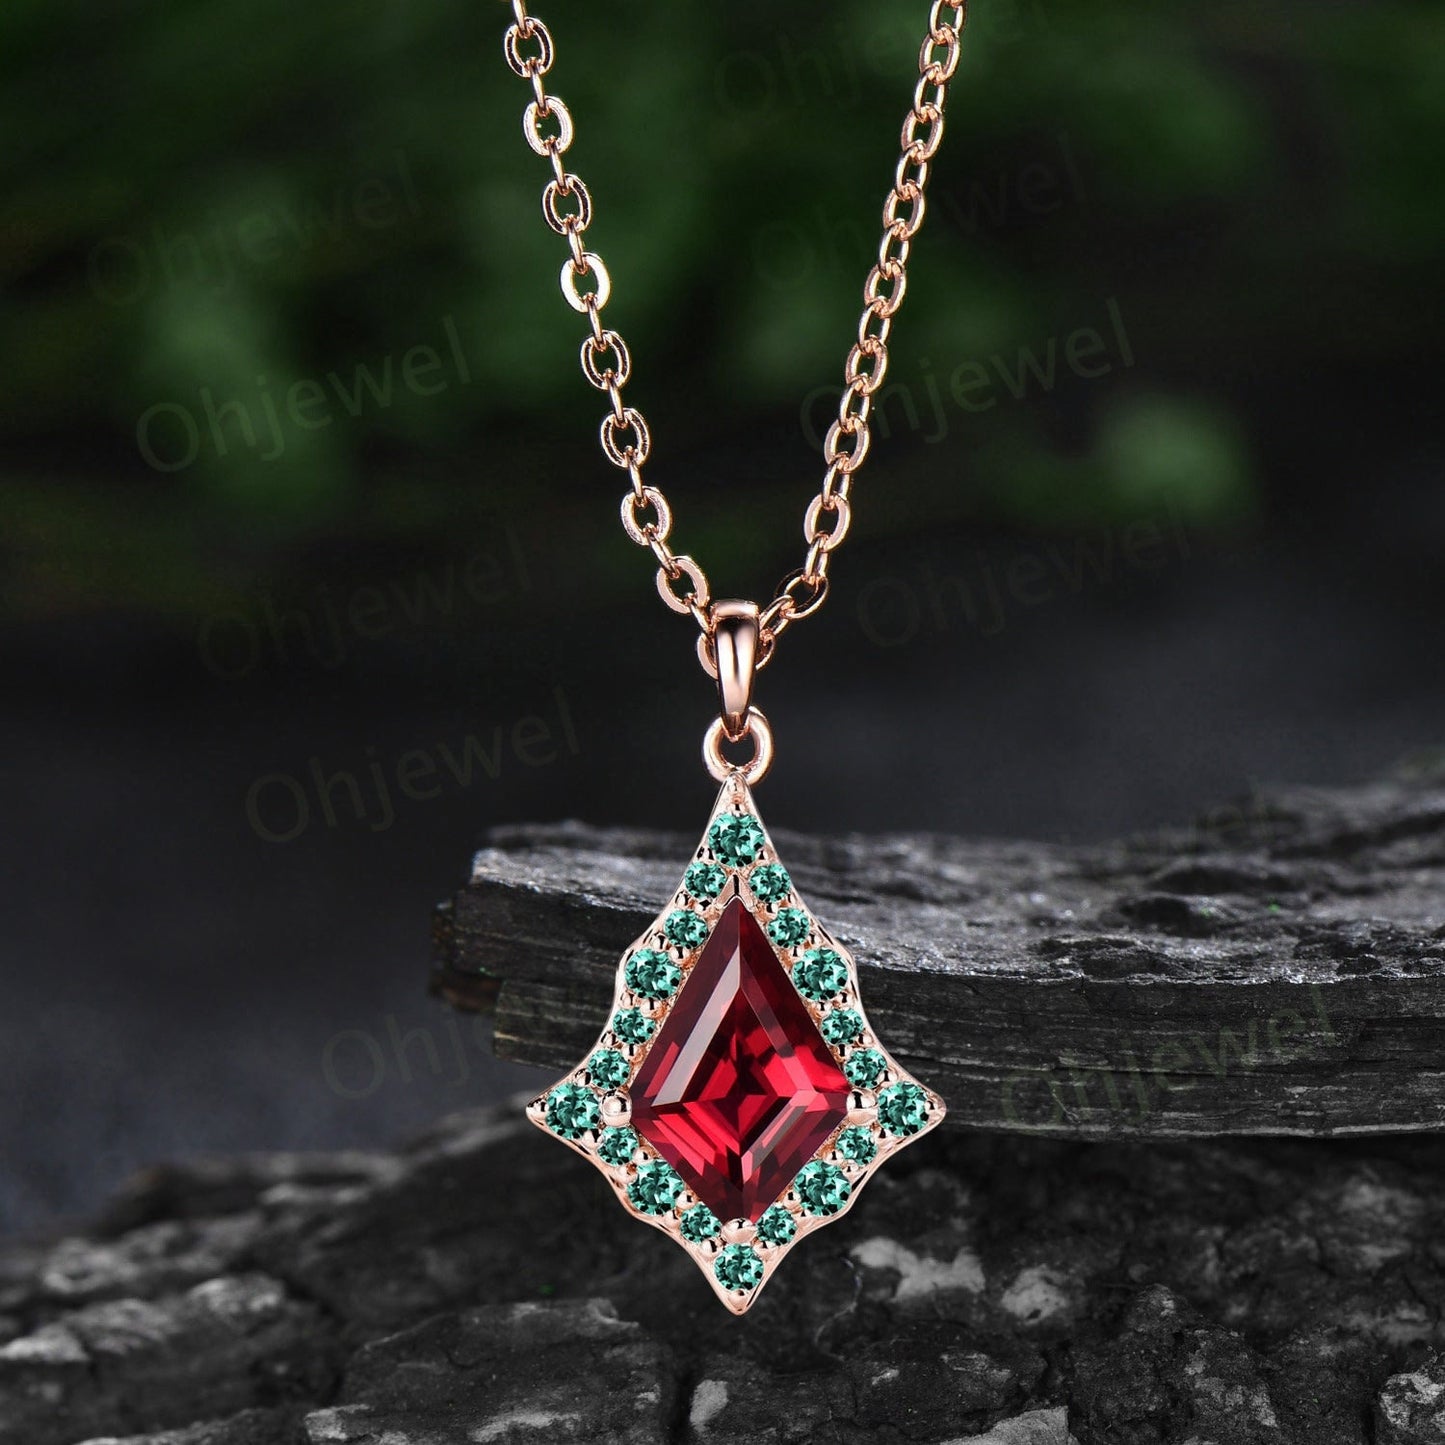 Vintage kite red ruby necklace solid 14k rose gold unique snowdrift halo green emerald necklace Pendant women gemstone anniversary gift